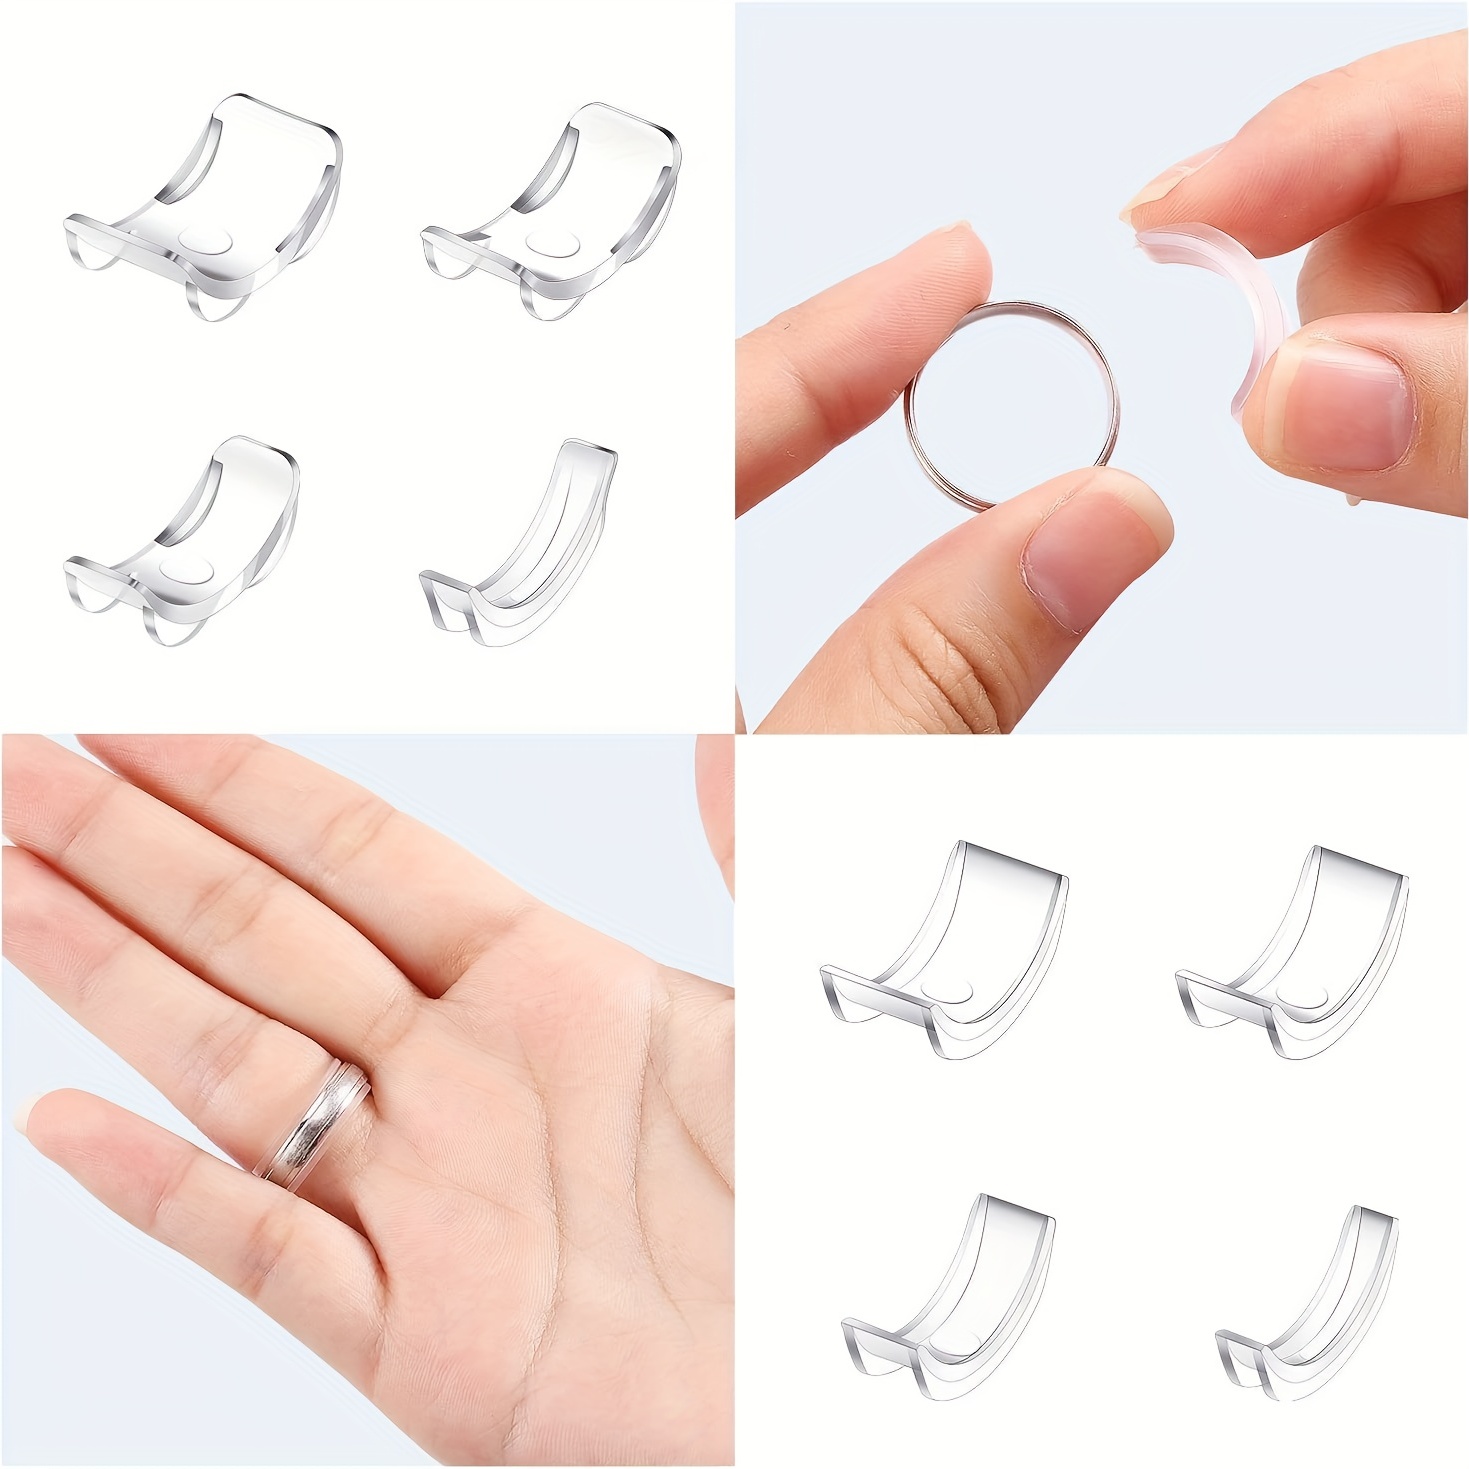 Silicone Ring Sizer Adjuster For Loose Rings, 4 Sizes Invisible